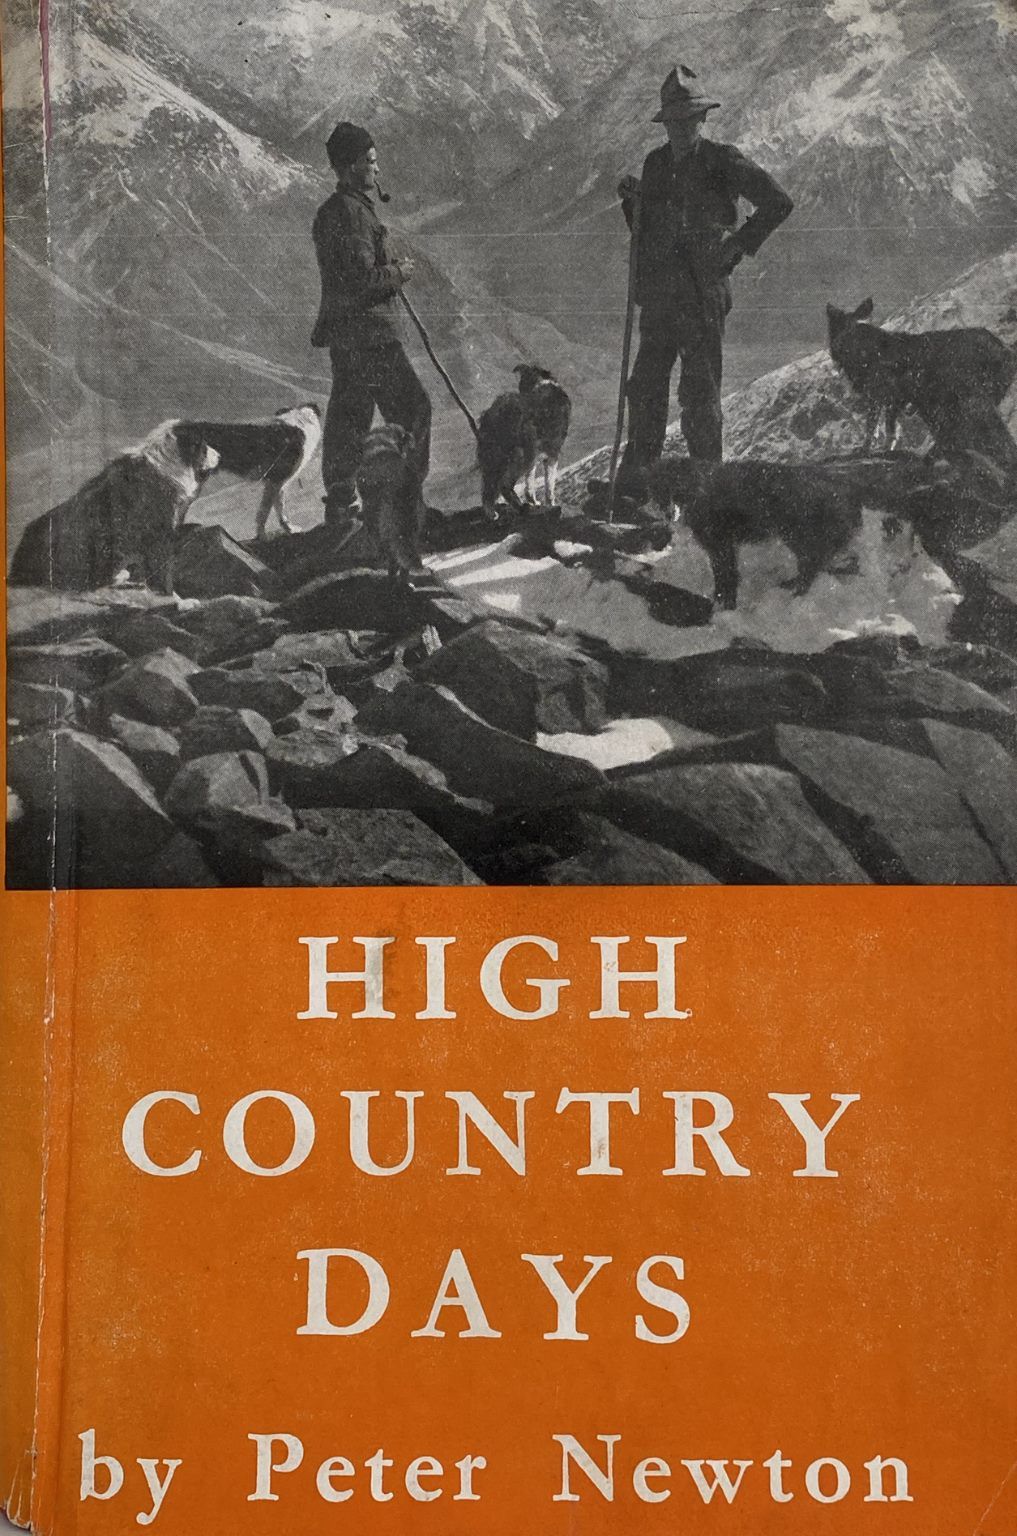 HIGH COUNTRY DAYS